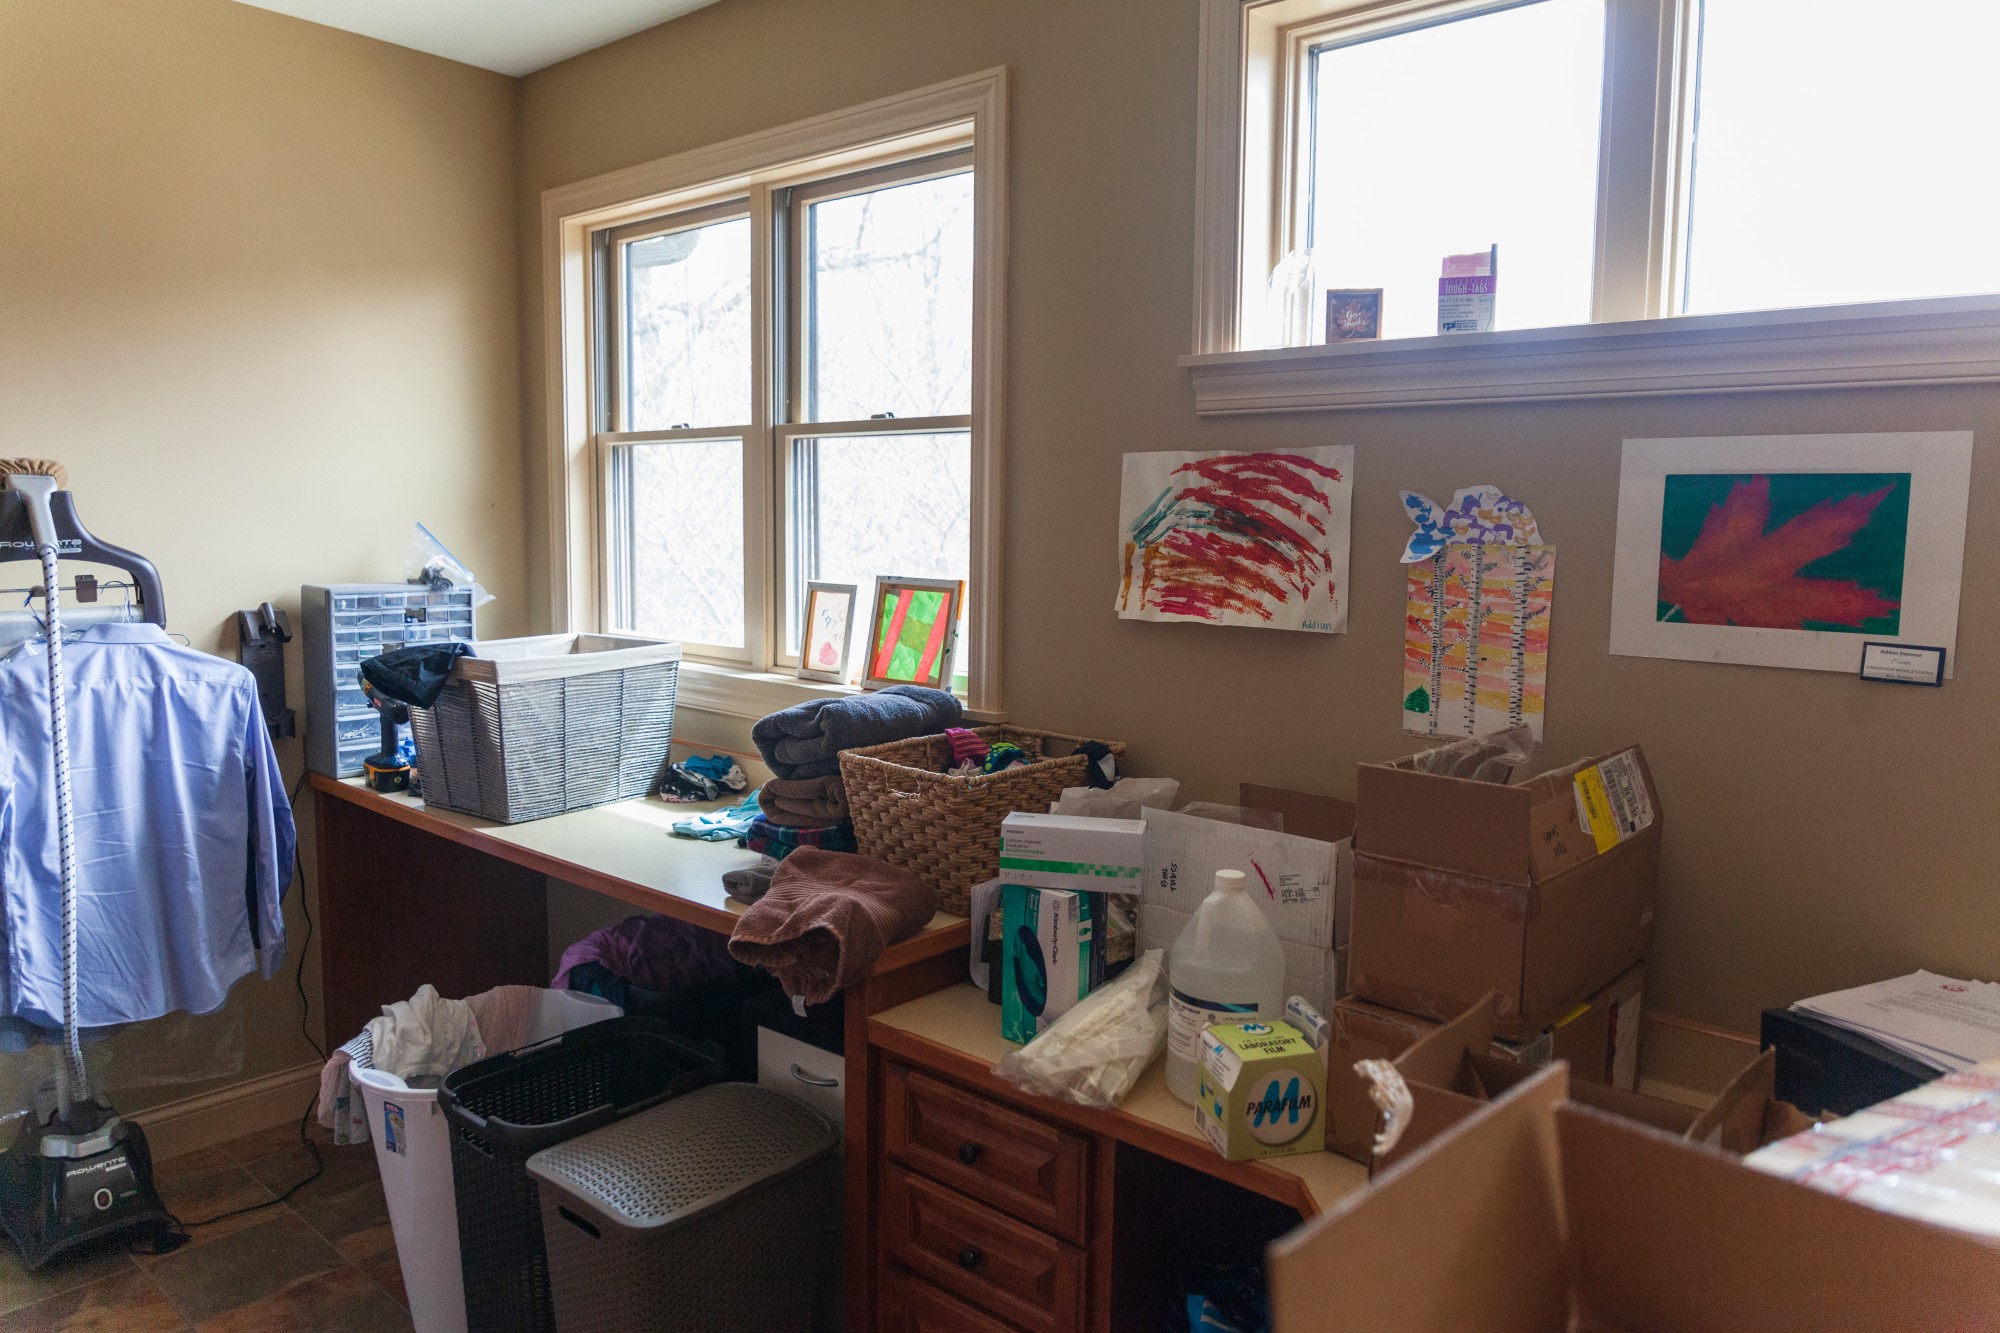 Components of a COVID-19 test kit sit among domestic goods in the home of Associate Professor Ryan Demmer on Friday, April 10.  The kit is being used to collect research data on the rate of asymptomatic infections among healthcare workers in the Twin Cities metro area.